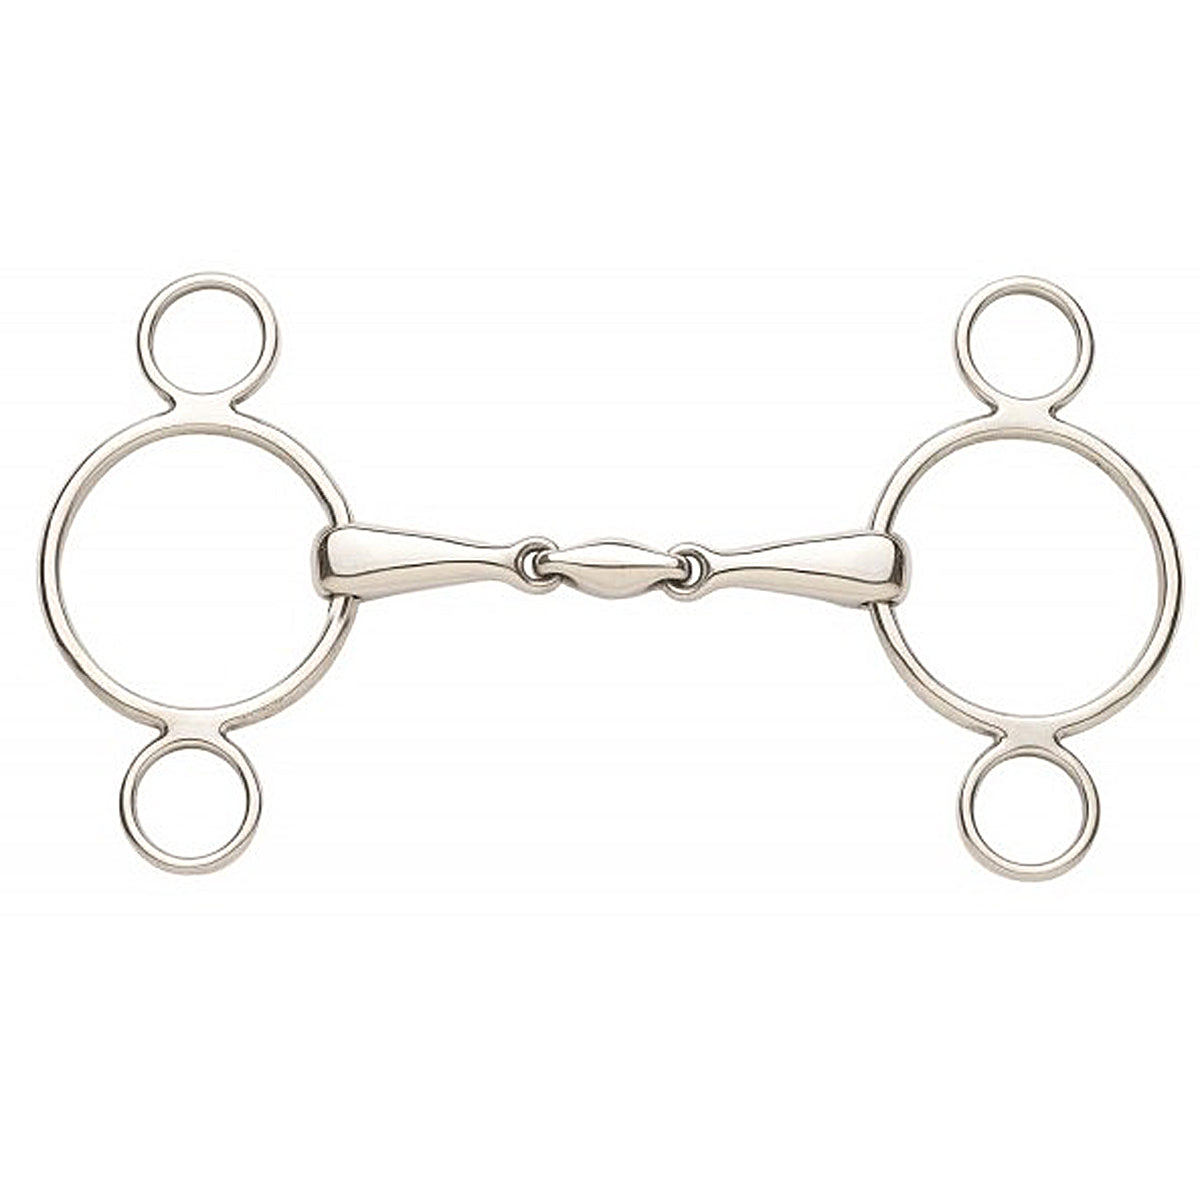 Ovation Elite Solid Stainless Steel 2-Ring Gag